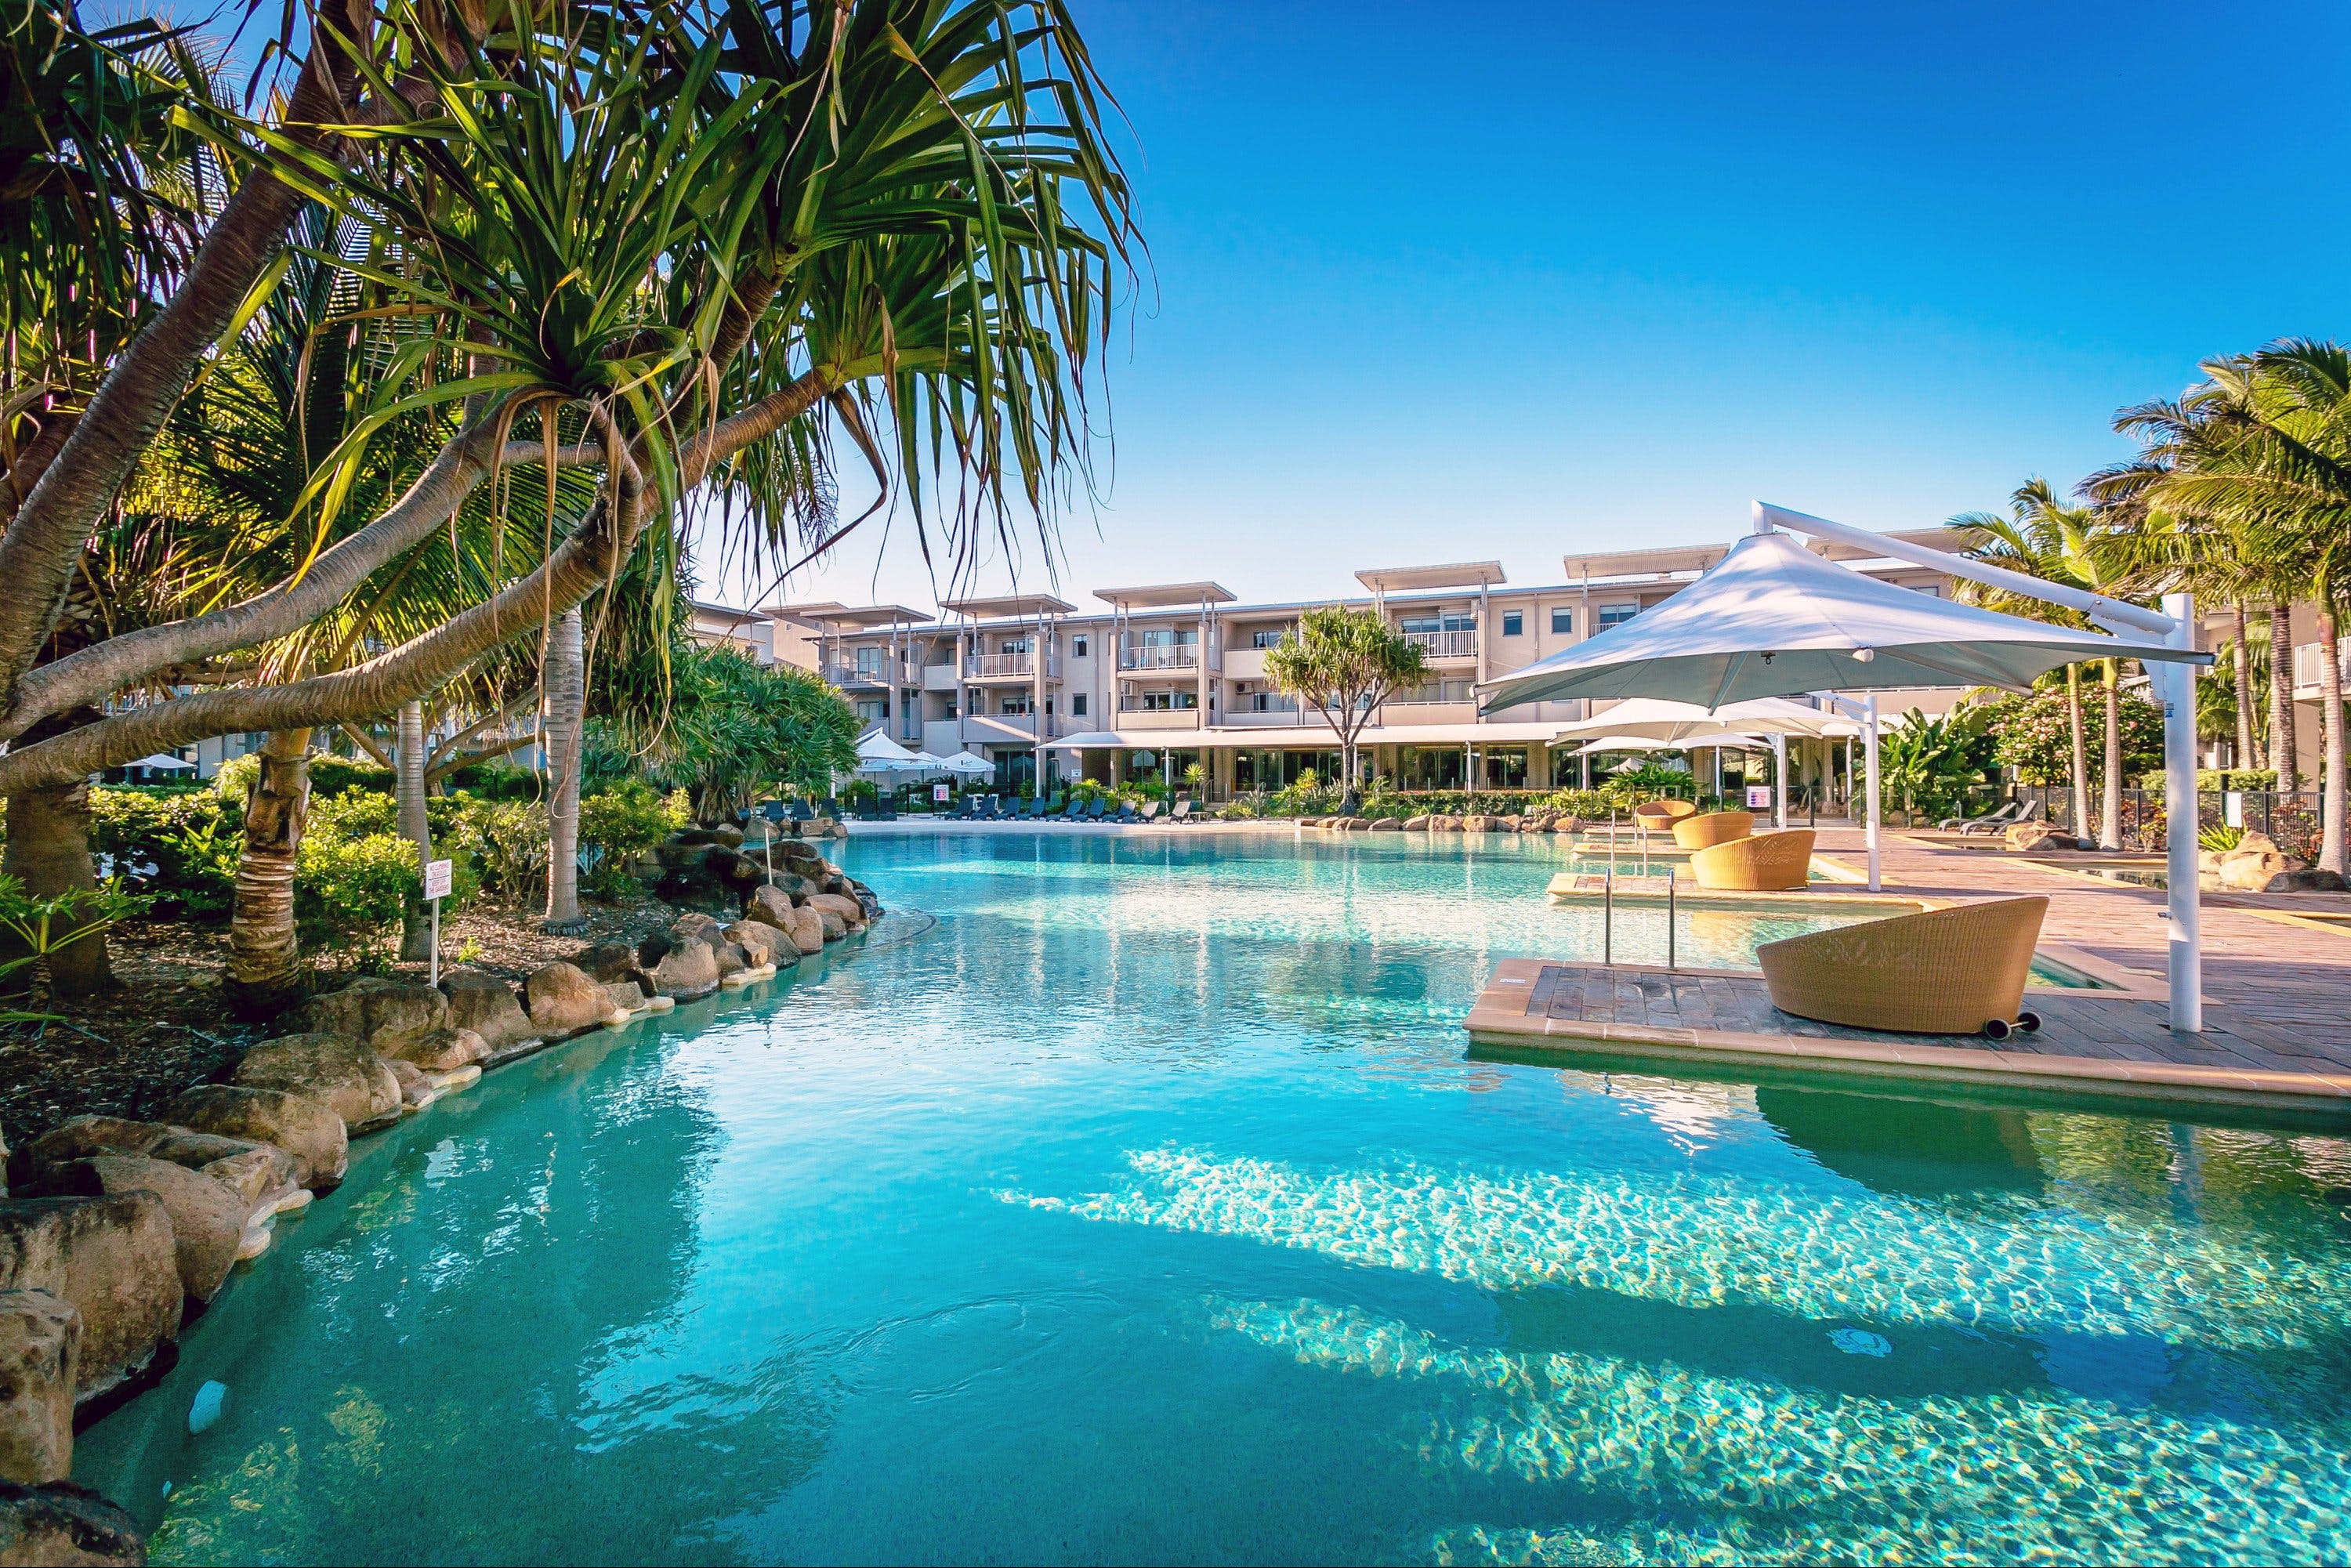 Peppers Salt Resort and Spa - Kempsey Accommodation